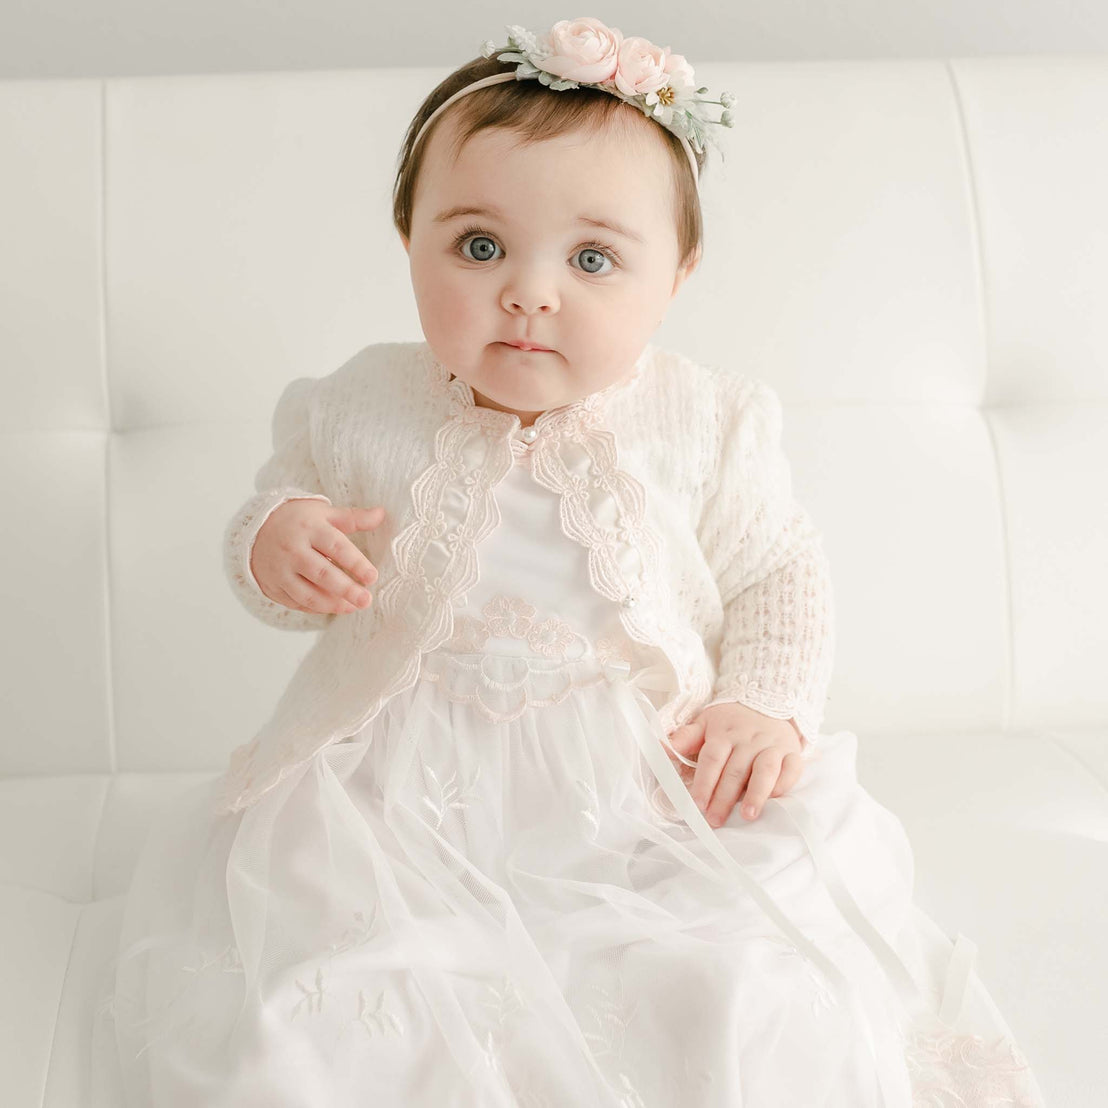 A baby girl with blue eyes wearing a Joli Knit Sweater & Bonnet sits on an upscale white sofa, looking surprised.